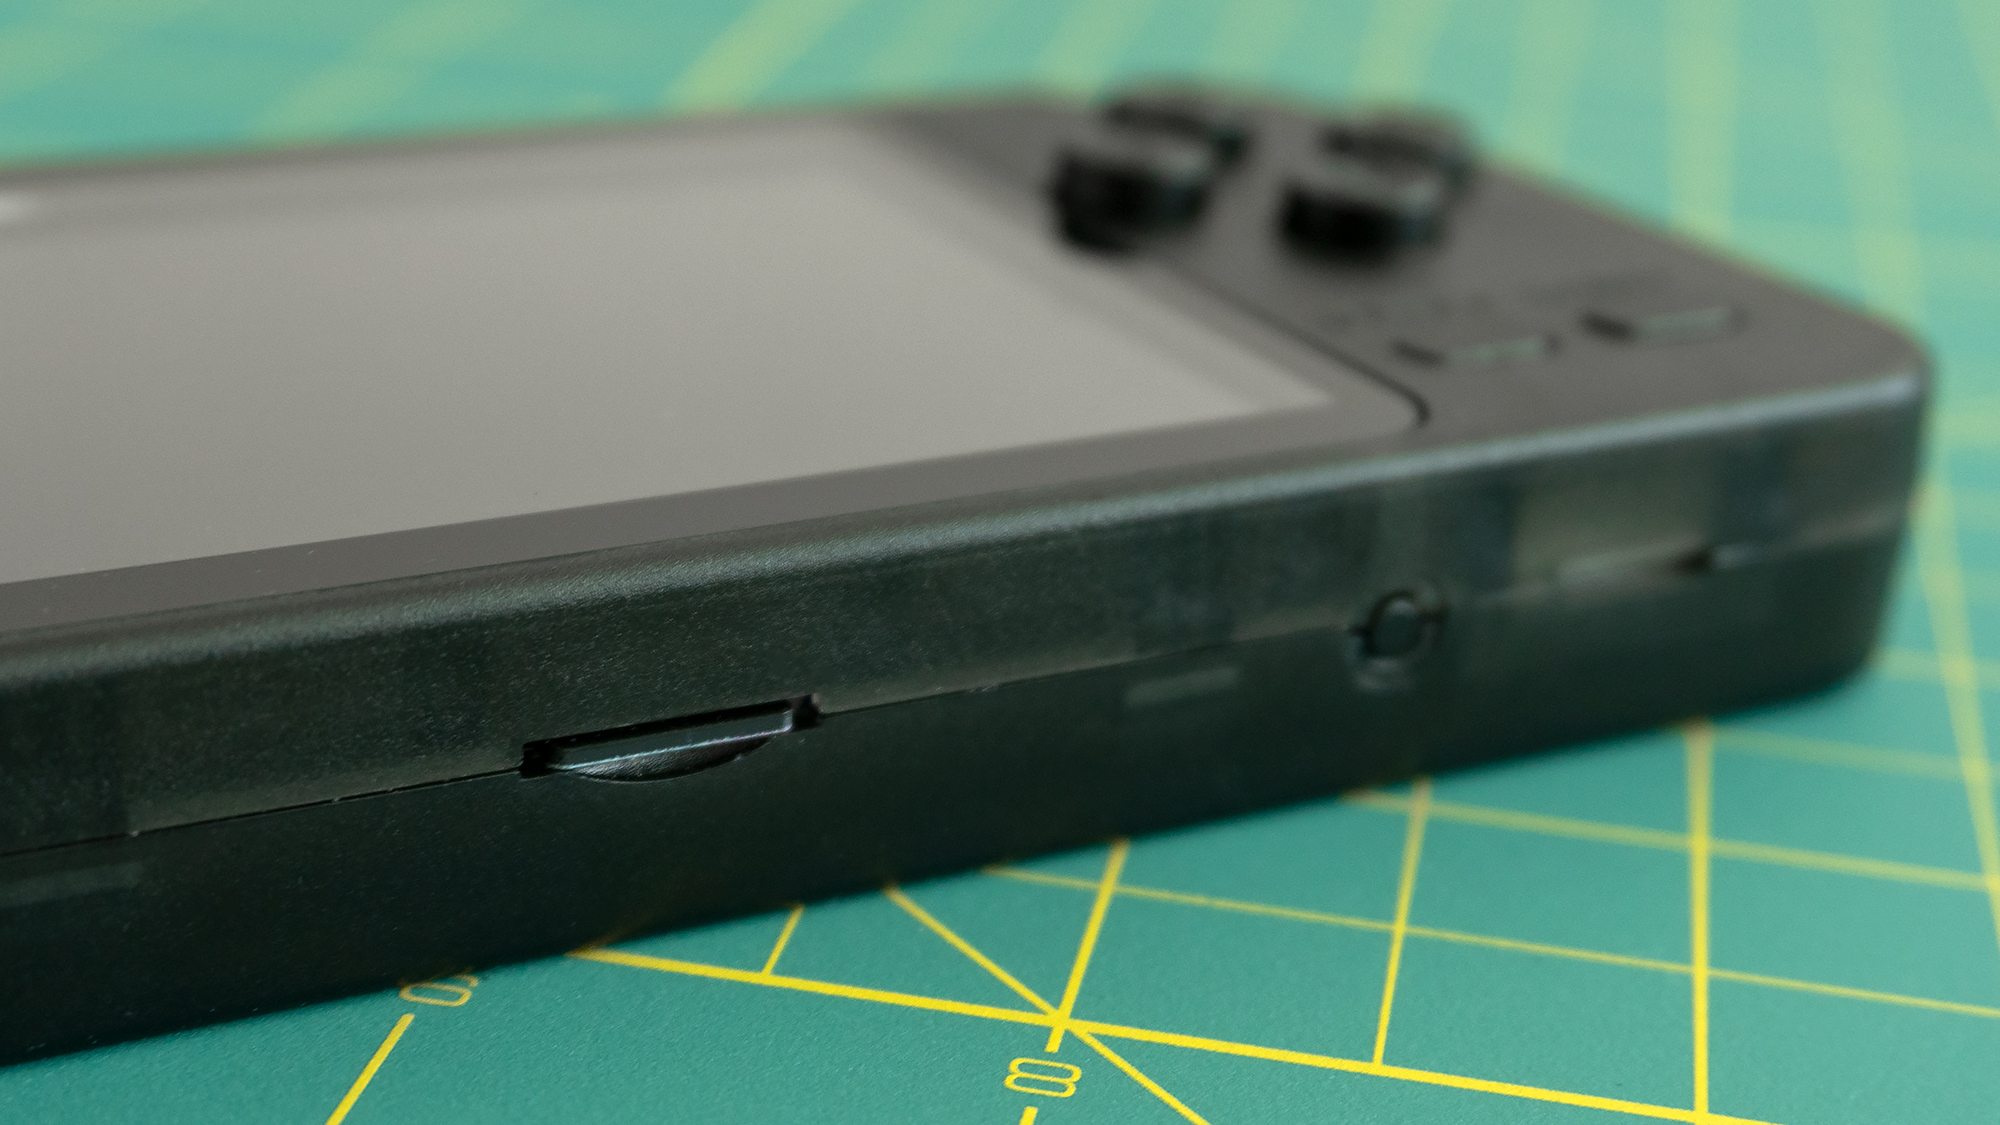 On the bottom you'll find a reset button, a slot for the speaker, and a single microSD card slot, which is one of the handheld's biggest challenges. (Photo: Andrew Liszewski - Gizmodo)